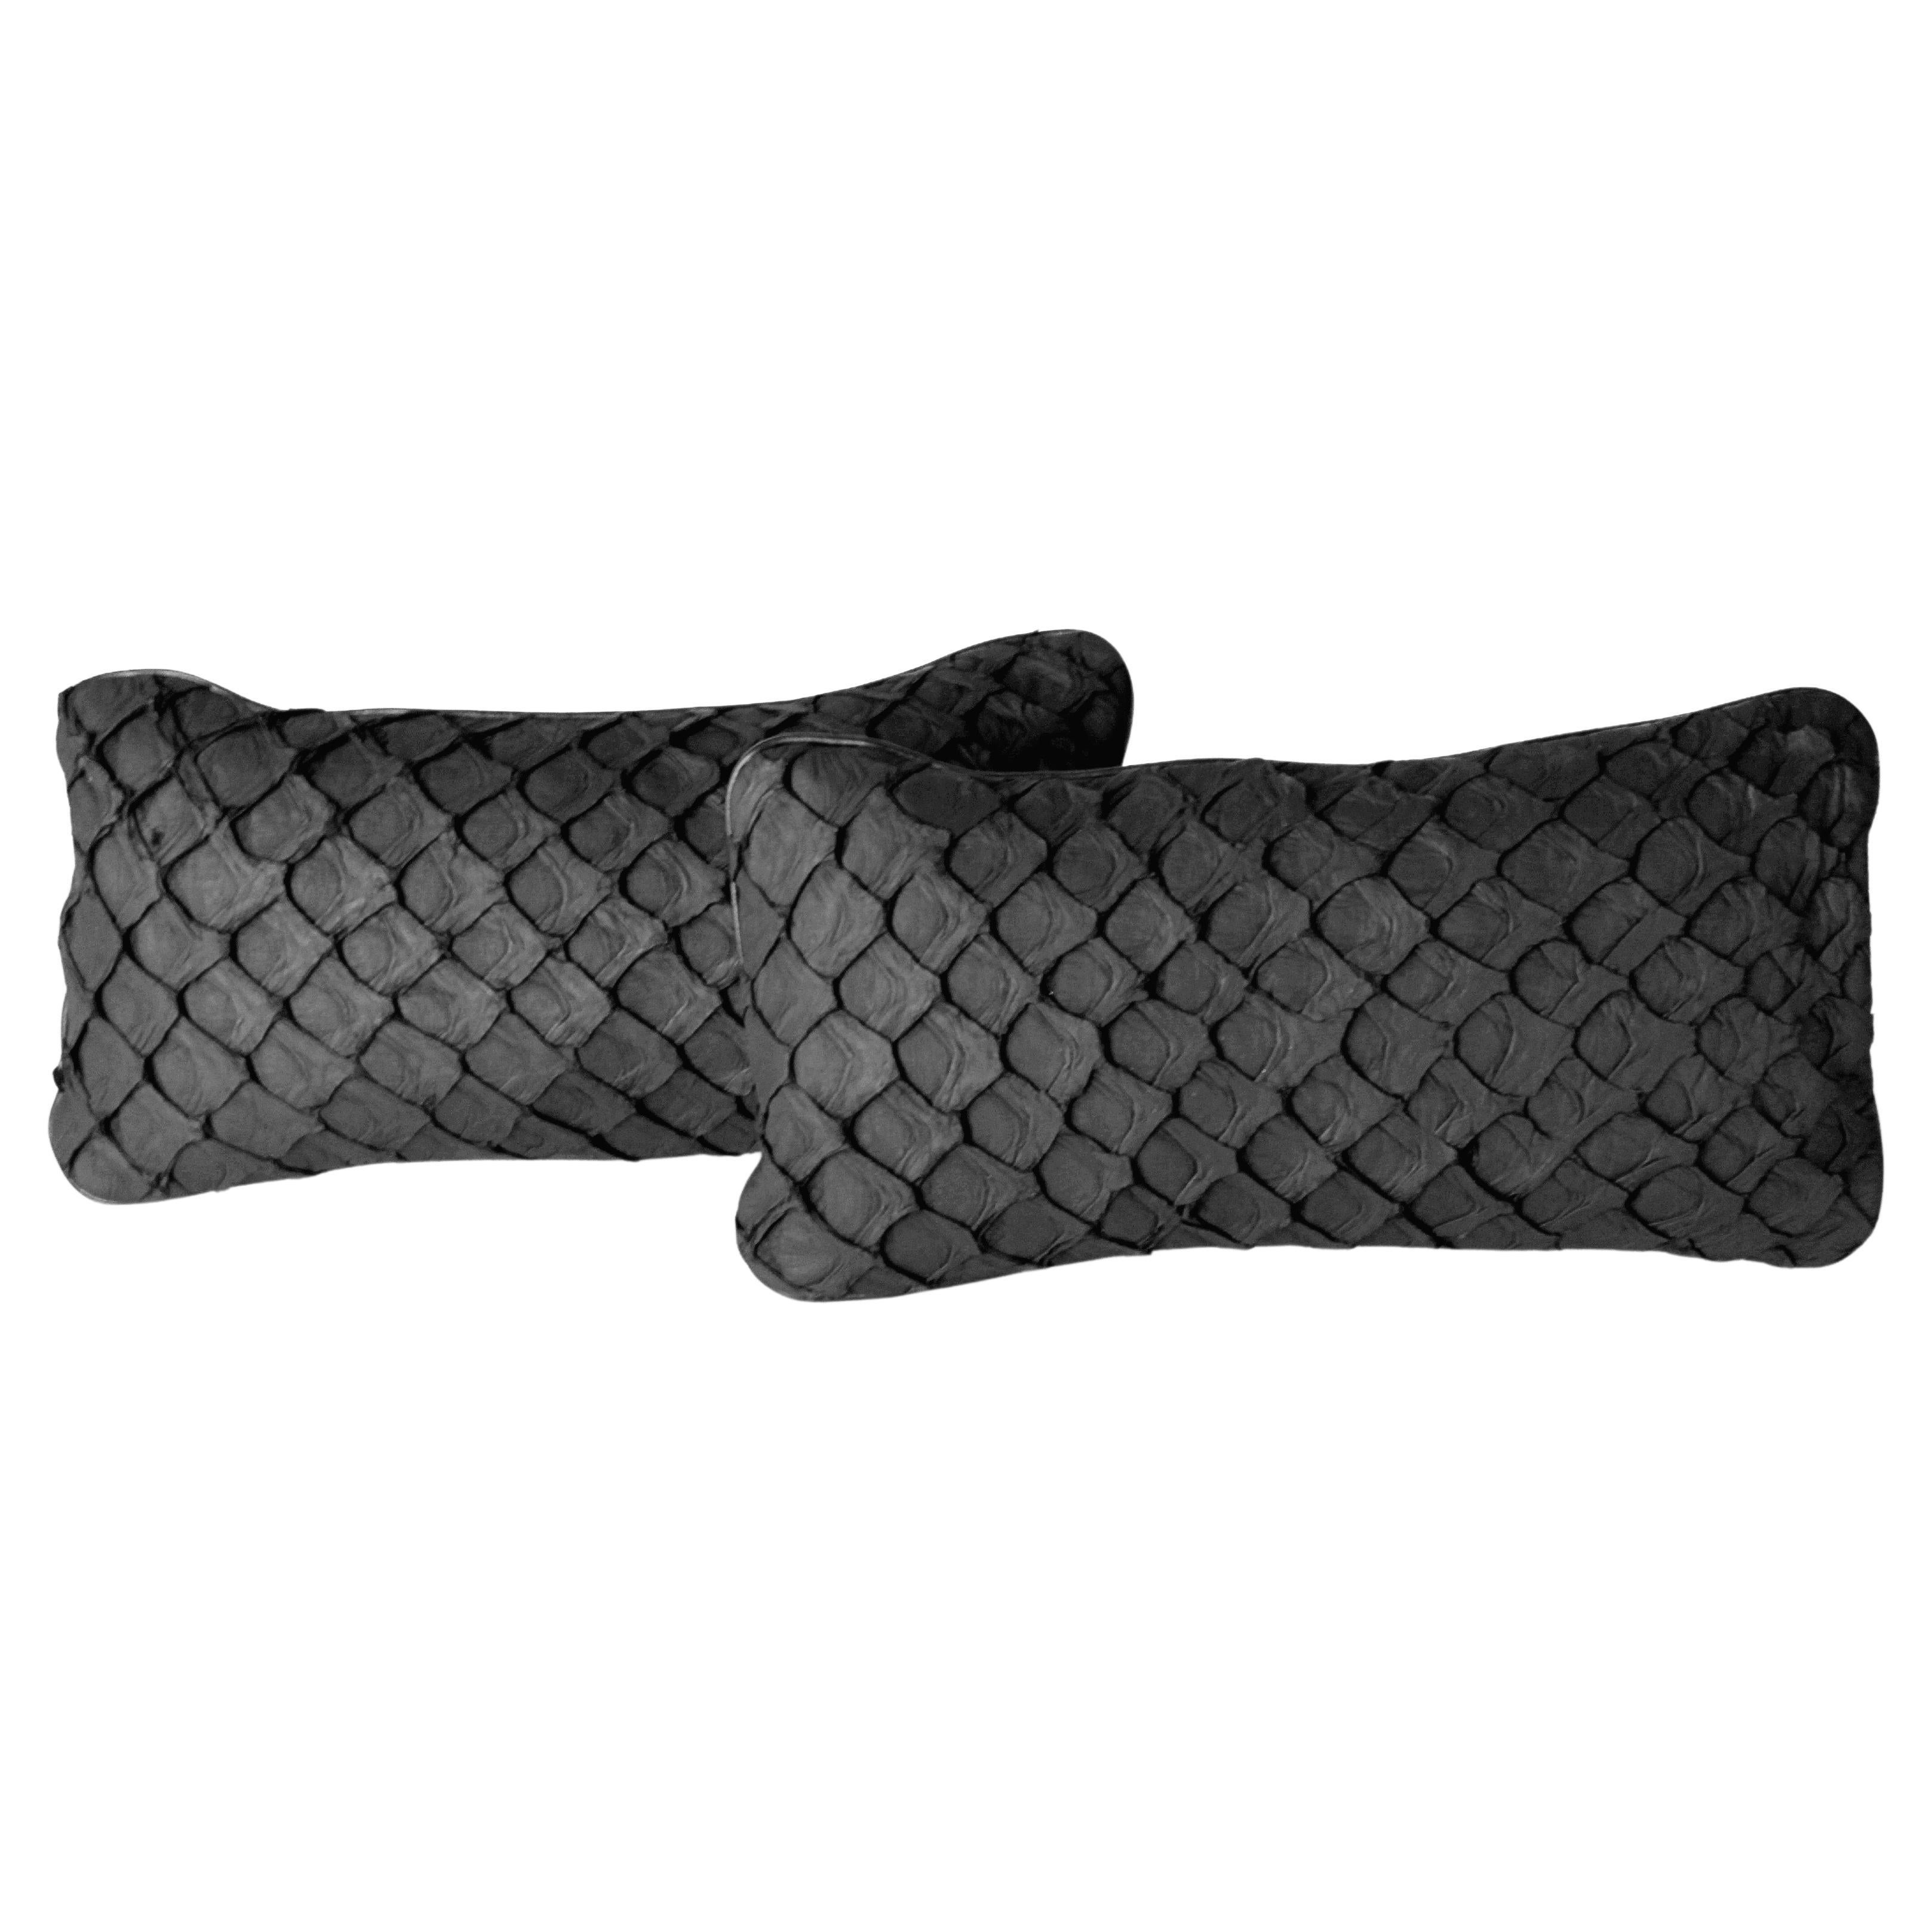 Set of 2 Leather Cushion, Exclusive Fish Leather Black Color For Sale